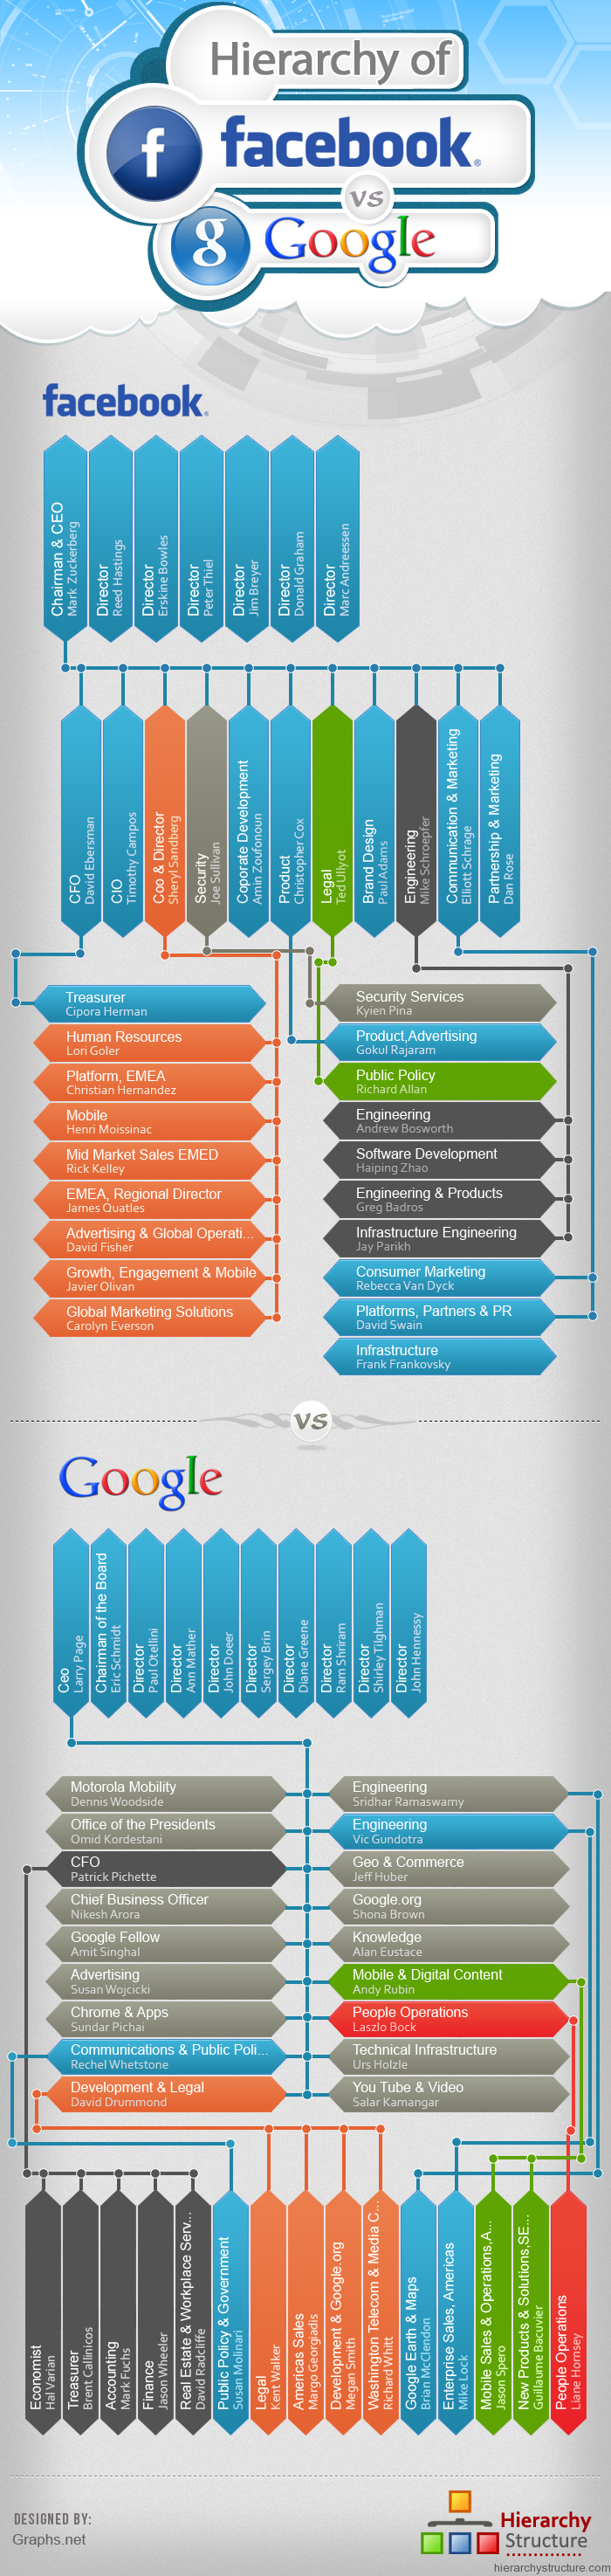 Hierarchy-Of-Facebook-and-Google[1]